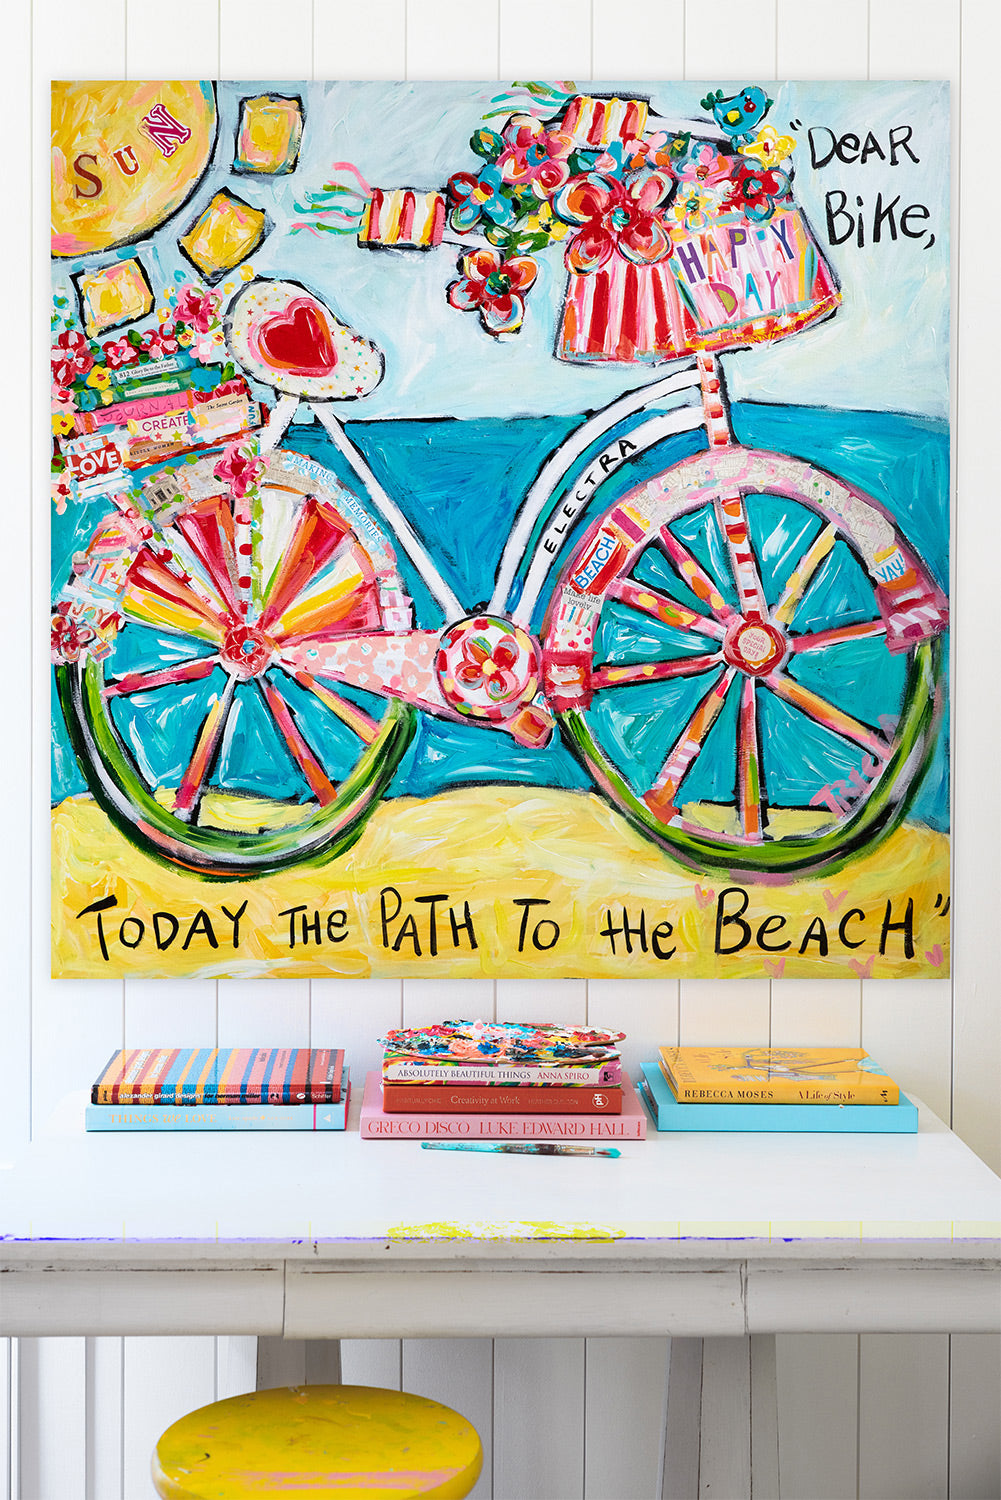 Dear Bike, Today the Path to the Beach Giclee